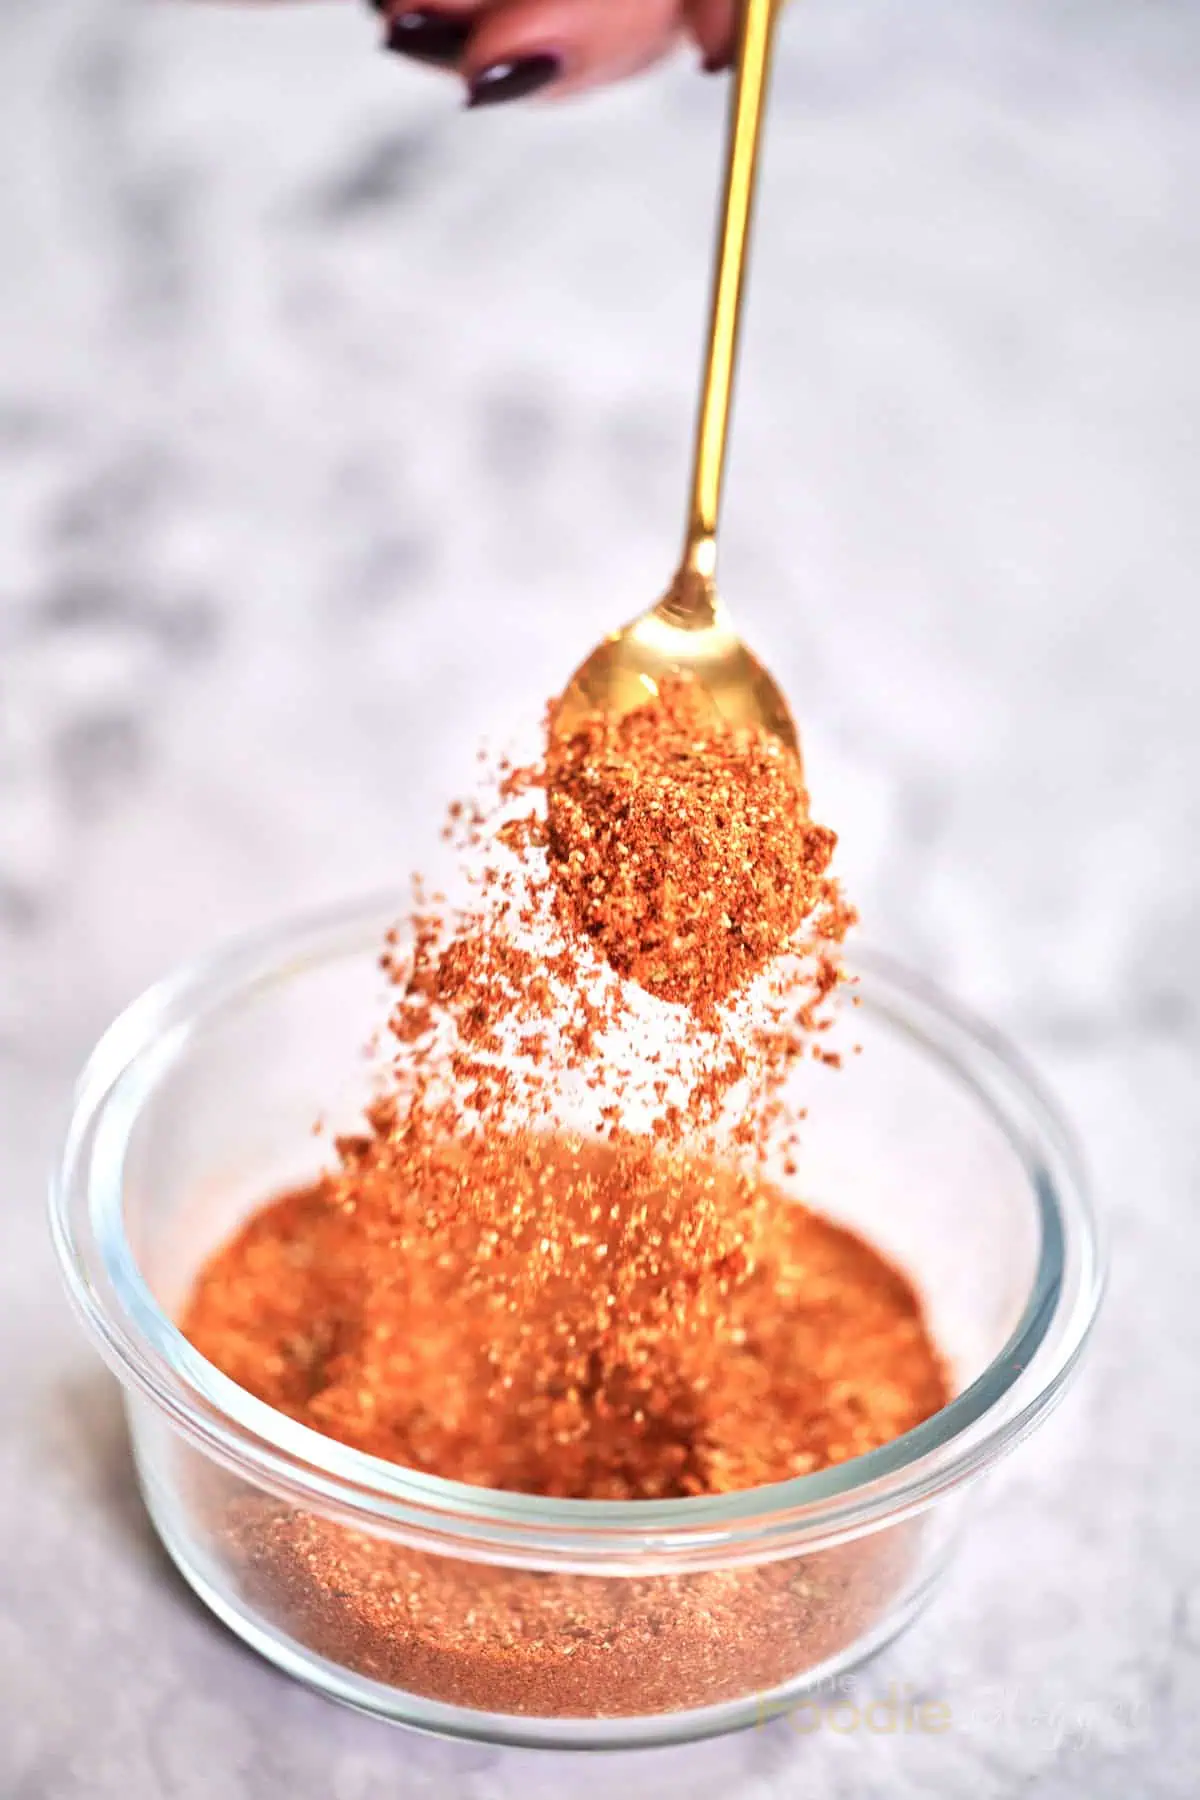 thefoodieblogger homemade taco seasoning blend in a spoon